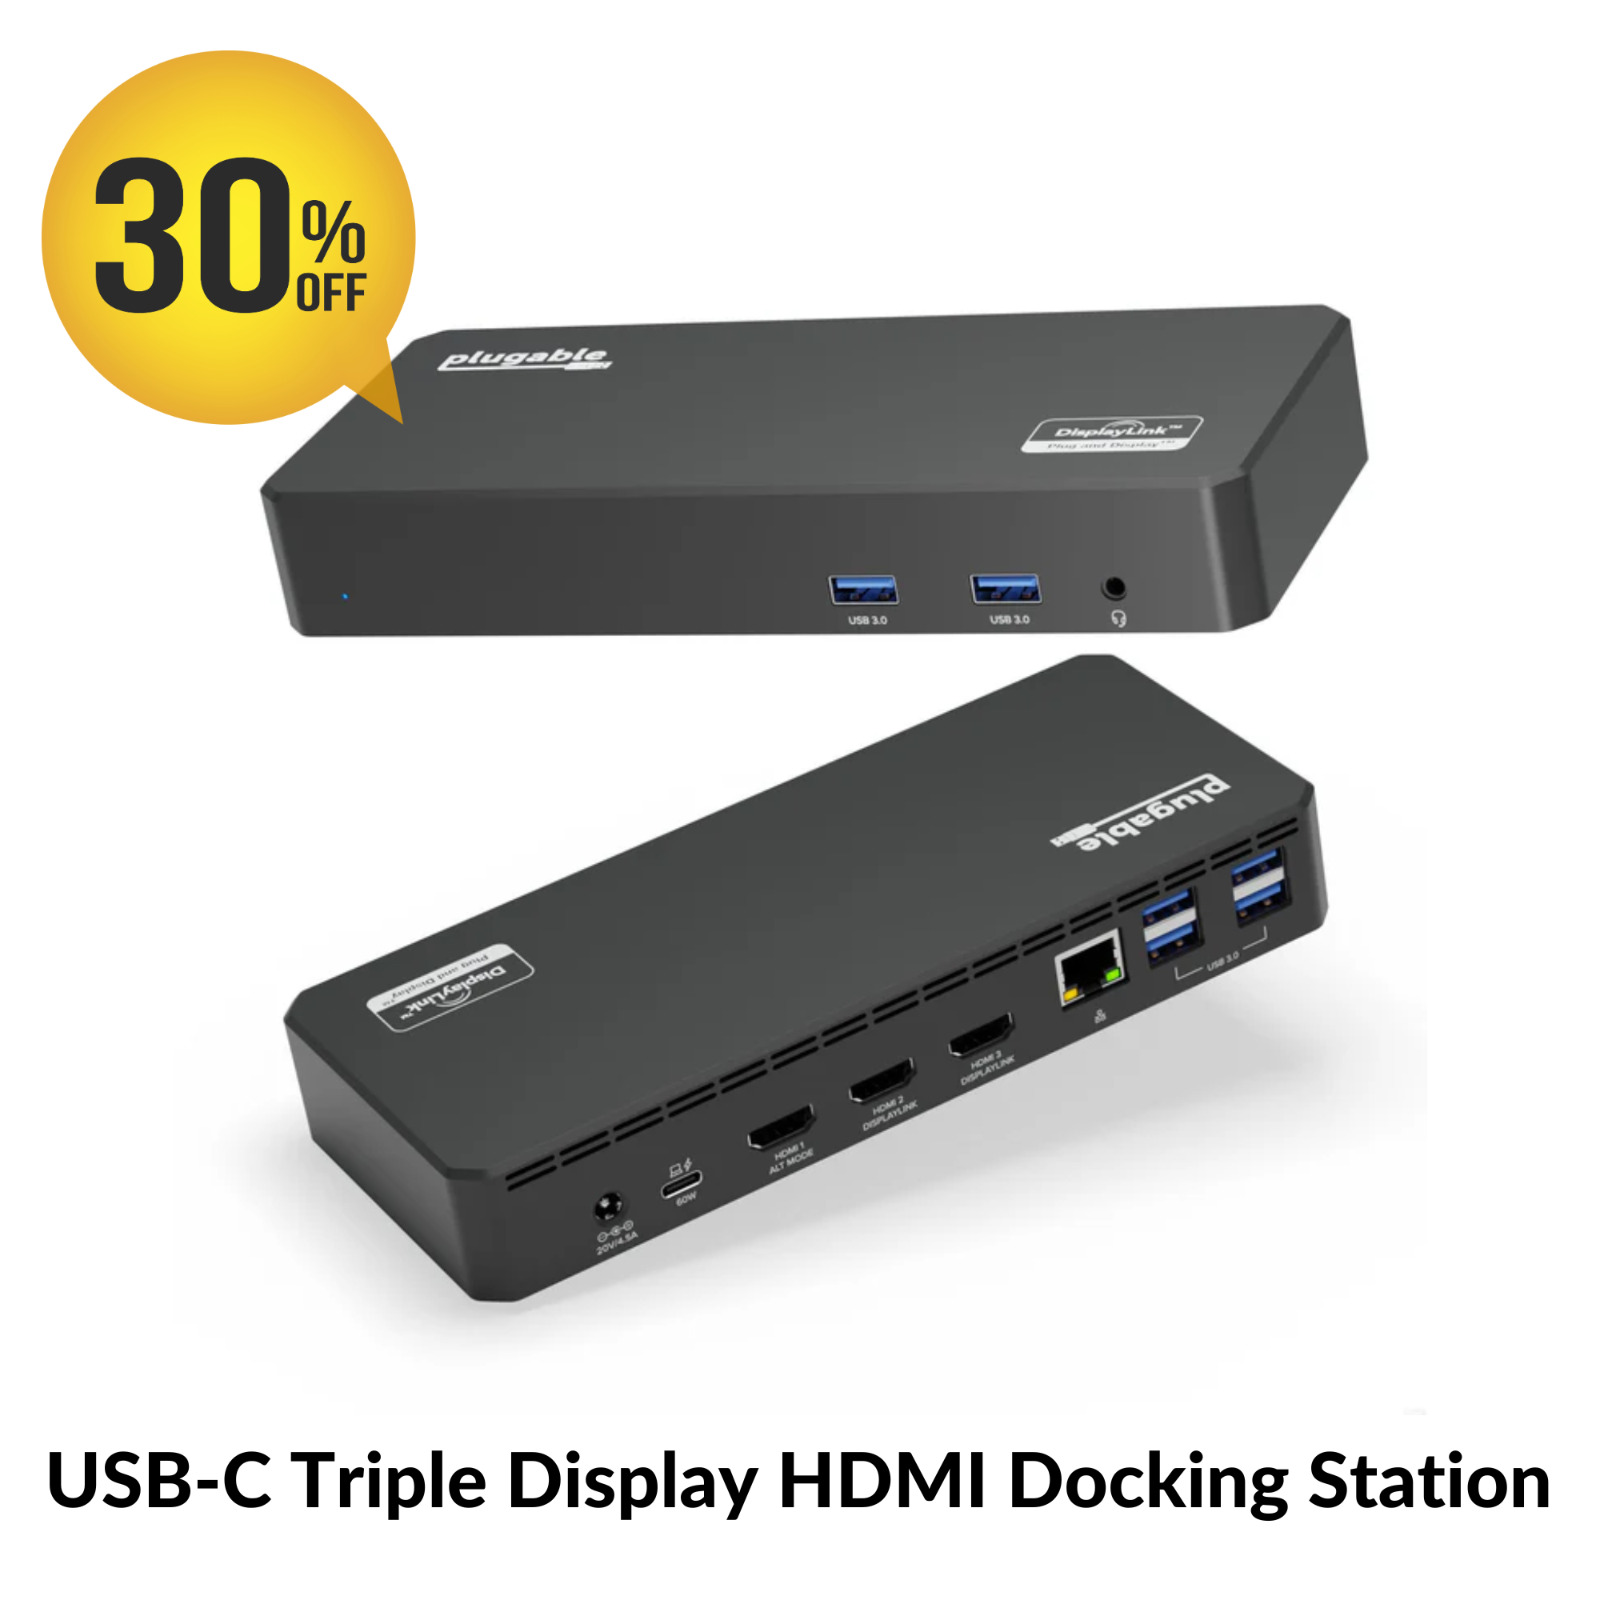 Plugable UD-3900PDZ Triple Display Docking Station with 60W Laptop Charging